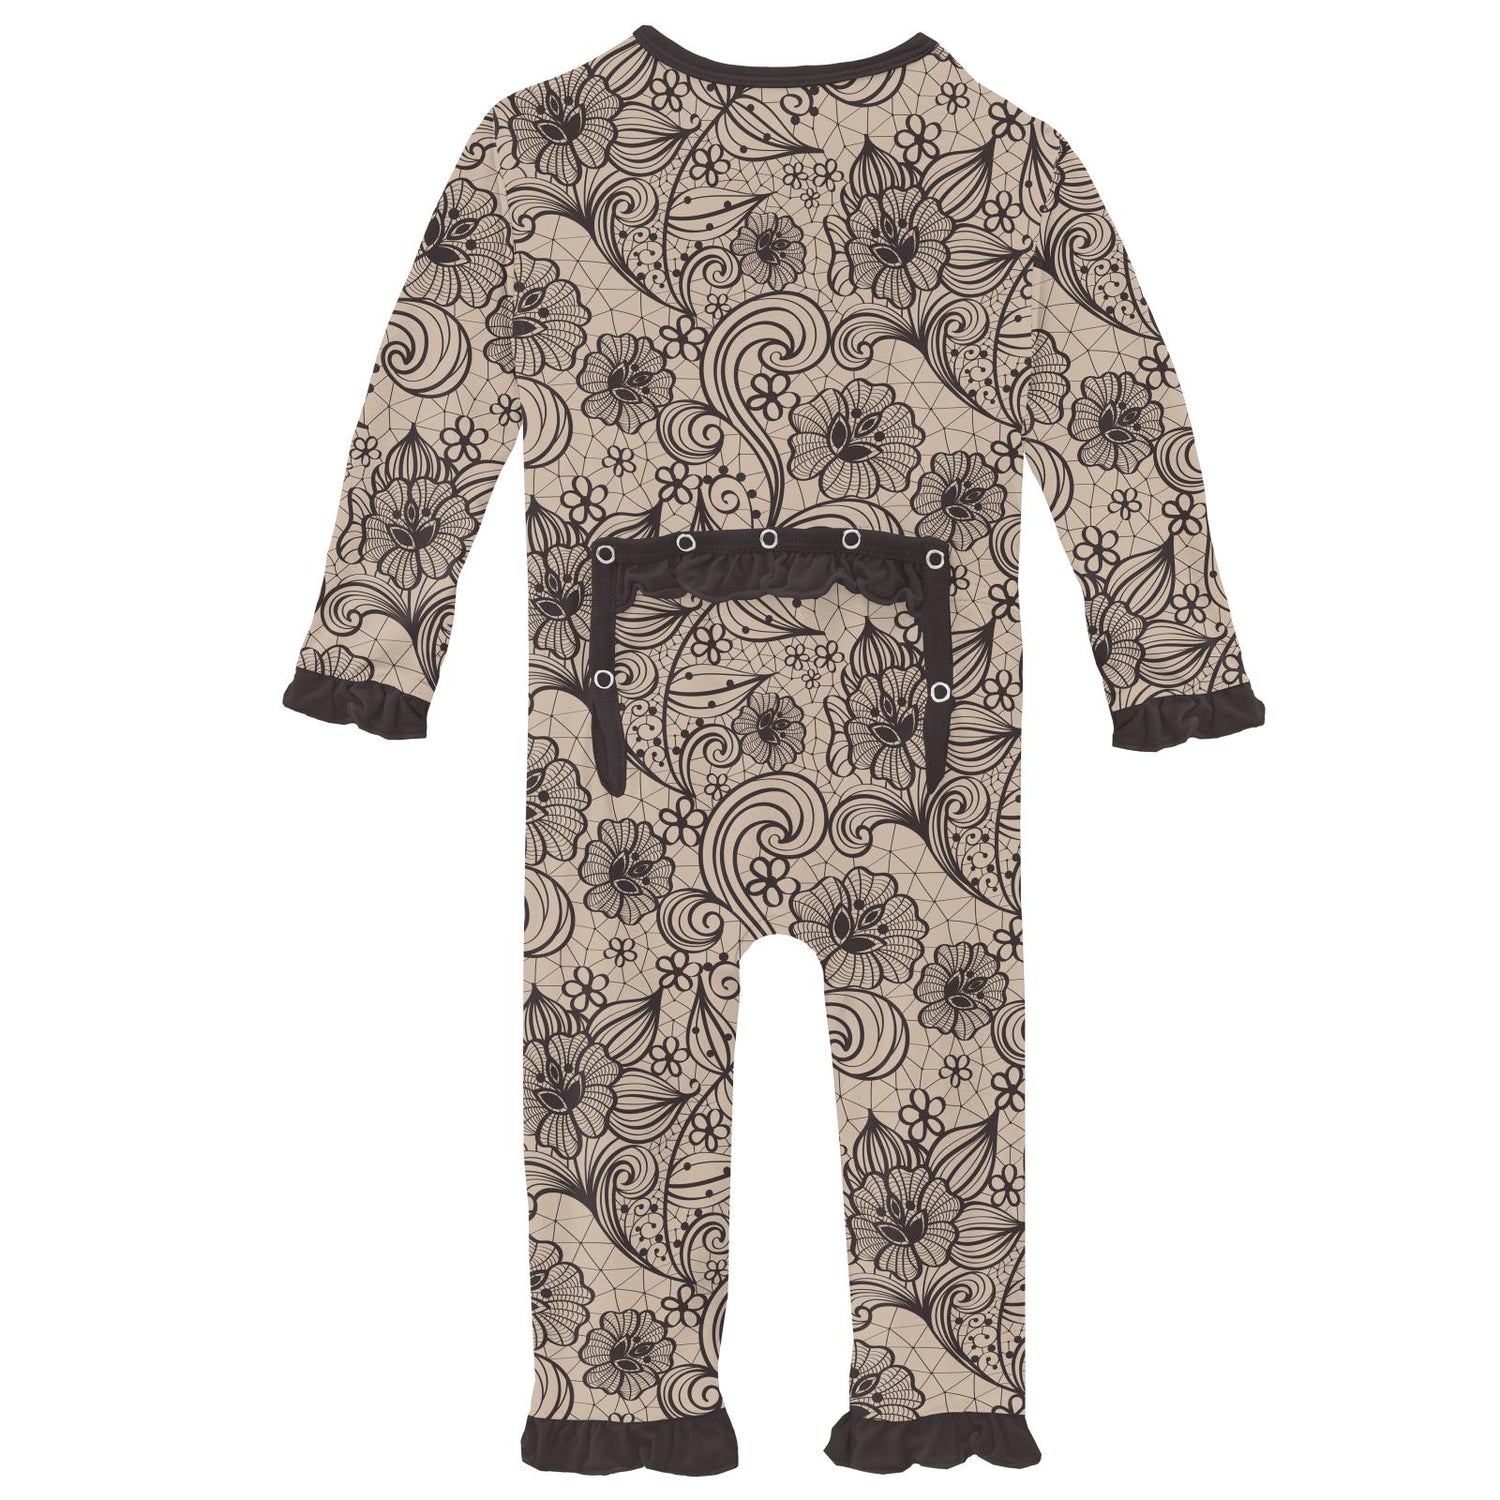 Print Classic Ruffle Coverall with Snaps in Burlap Lace